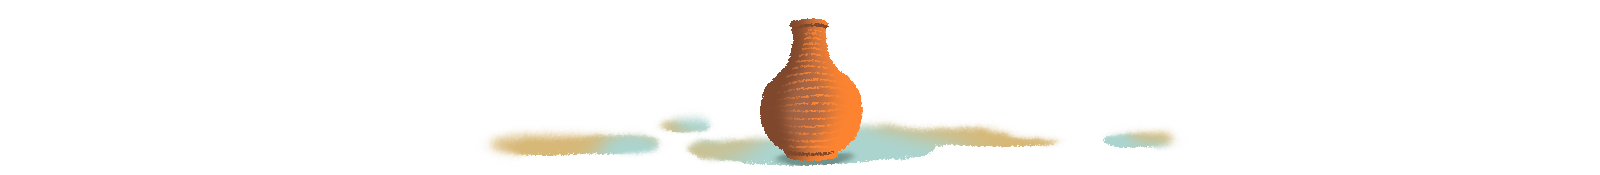 Illustration of clay pot used to divide story text